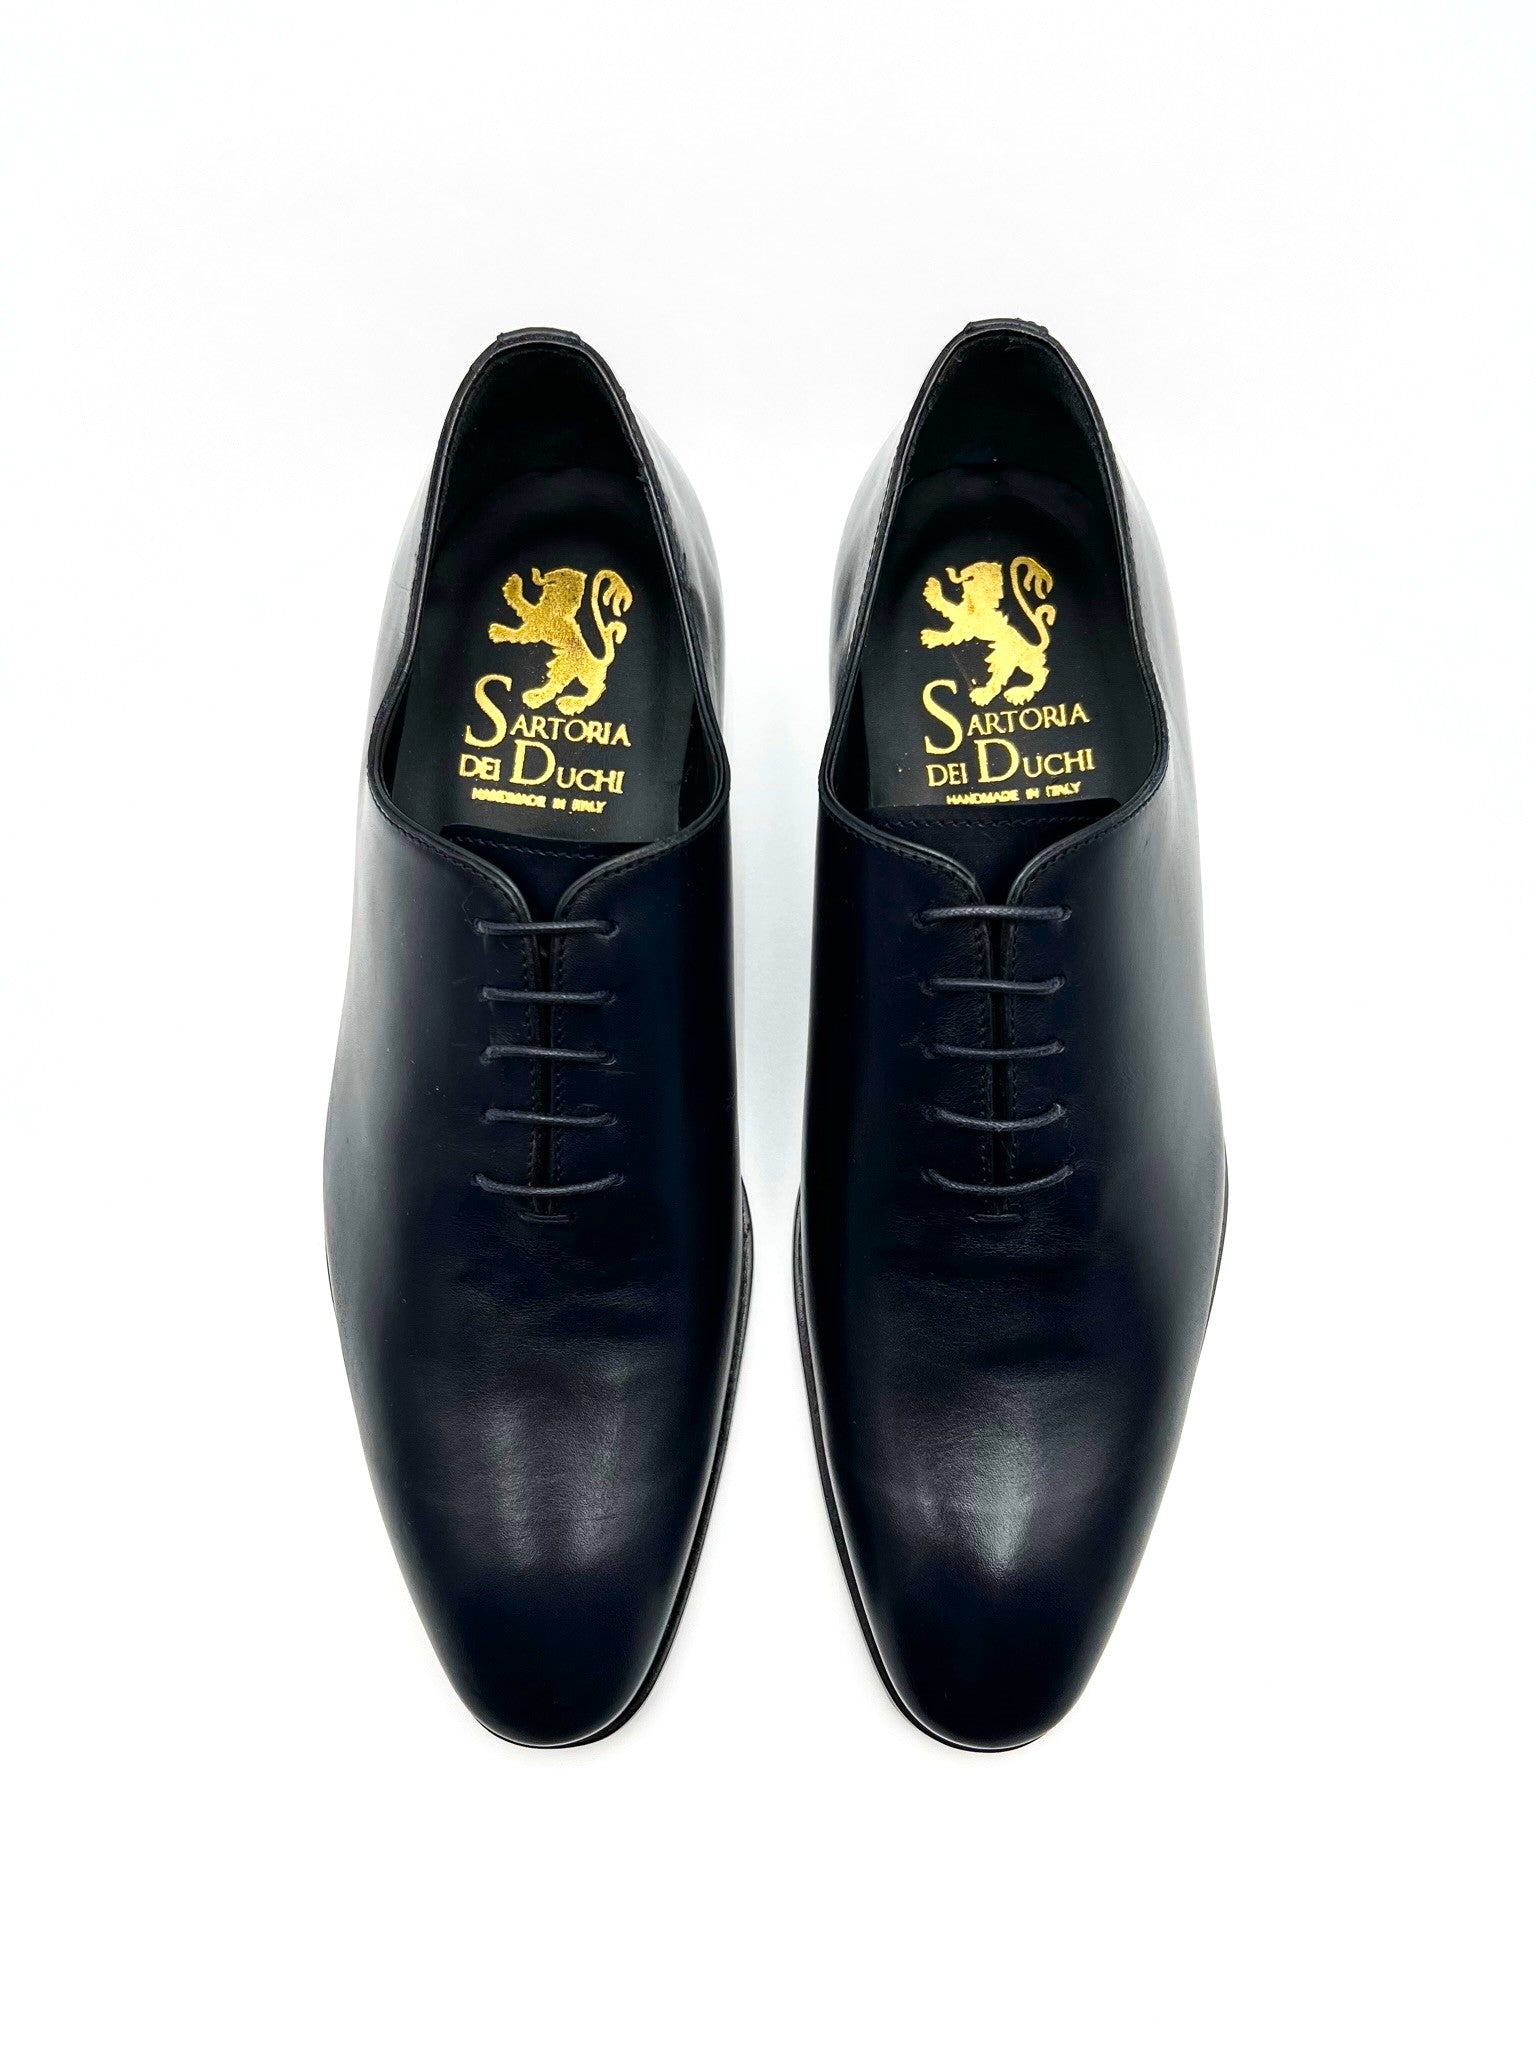 Oxford Whole cut, made of a single piece of leather,  without seams, in polished abrasive calfskin.  The Whole cut, has an elegant, clean appearance. Lightweight leather sole with non-slip insert sewn  to BLAKE. Made in Italy with genuine leather.Process: Blake /  Leather: calfskin / Color: dark blue / Lining: Black calf /  Insole: leather.Handcrafted shoes, made in Italy with  genuine 100%Italian leather - Sartoria Dei Duchi-Atri